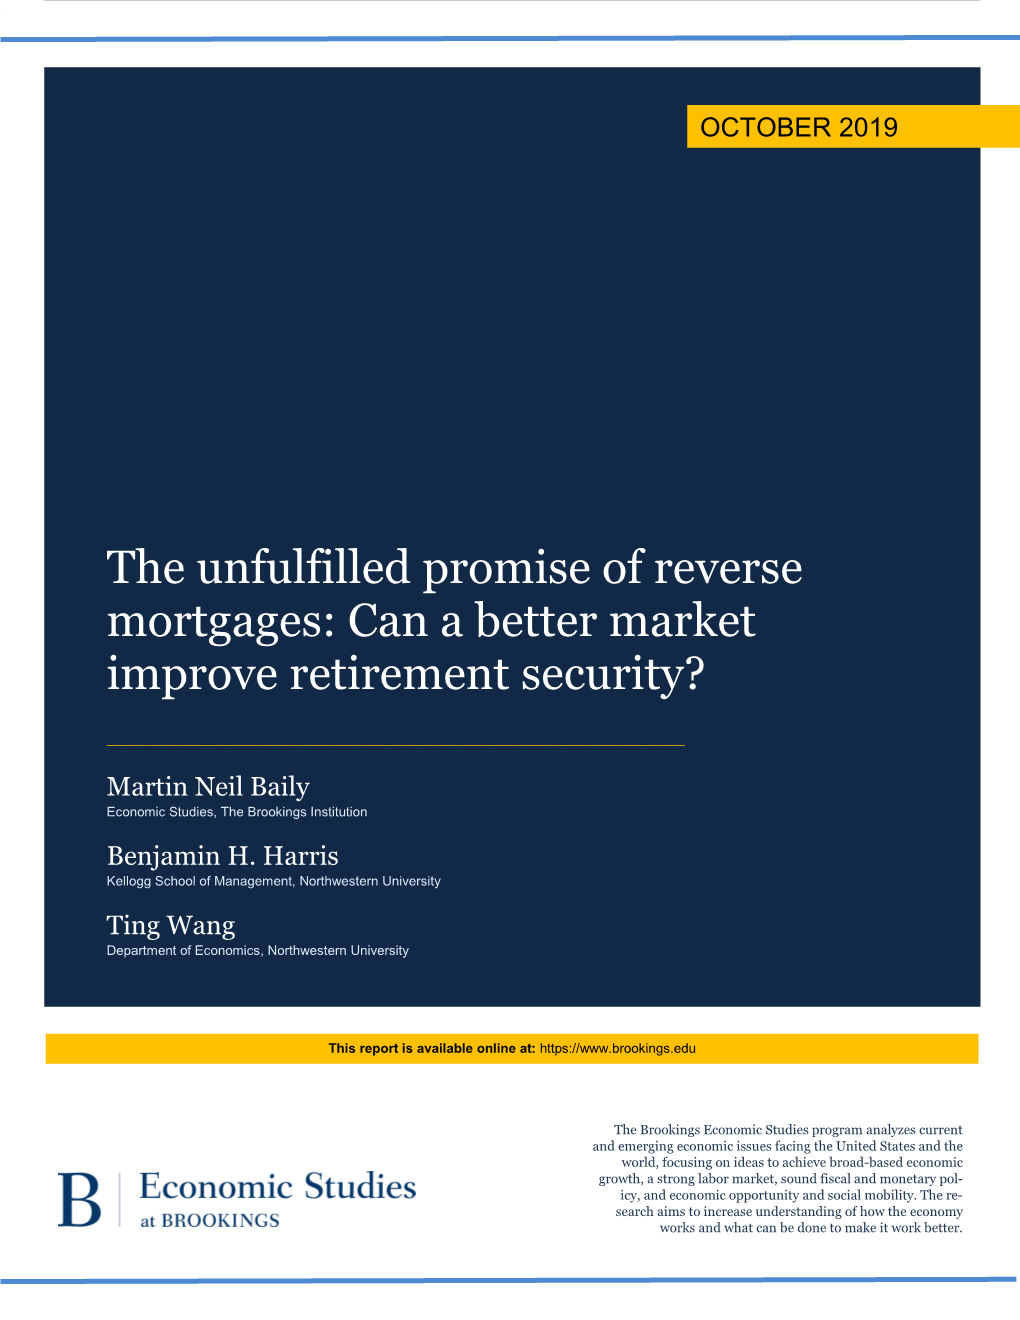 The Unfulfilled Promise of Reverse Mortgages: Can a Better Market Improve Retirement Security?